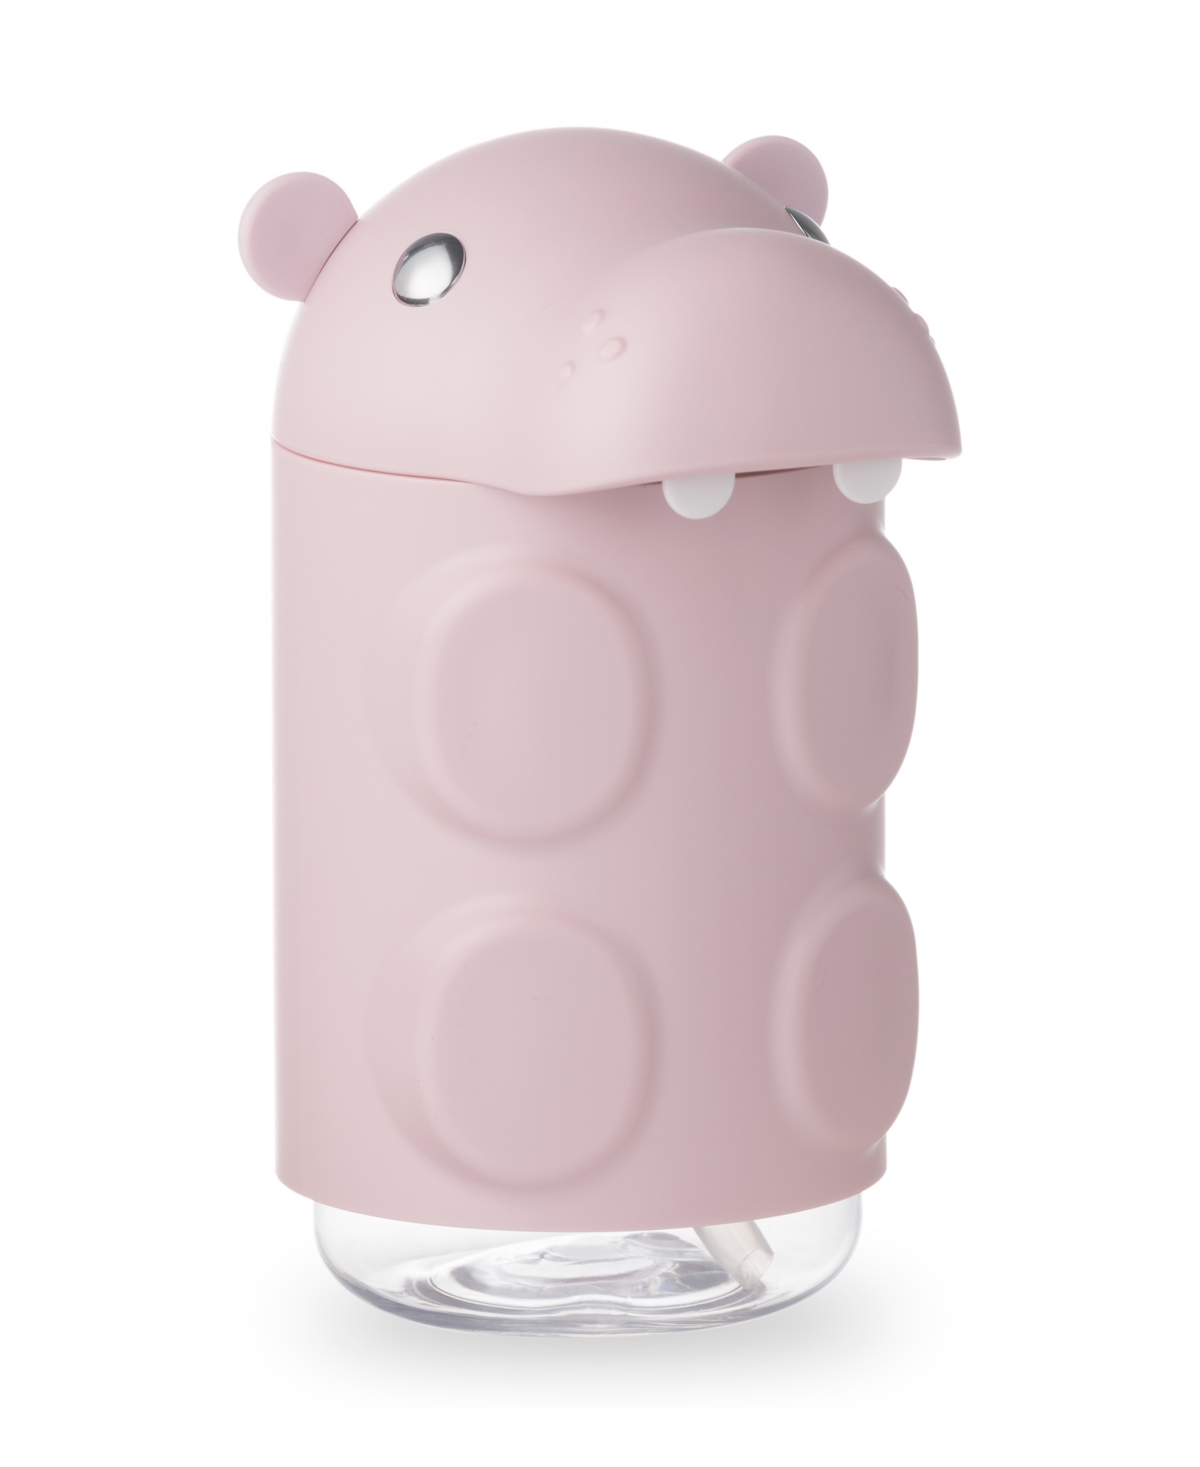 Everyday Solutions Soapbuds Hippo Soap Pump, 9 oz In Pink